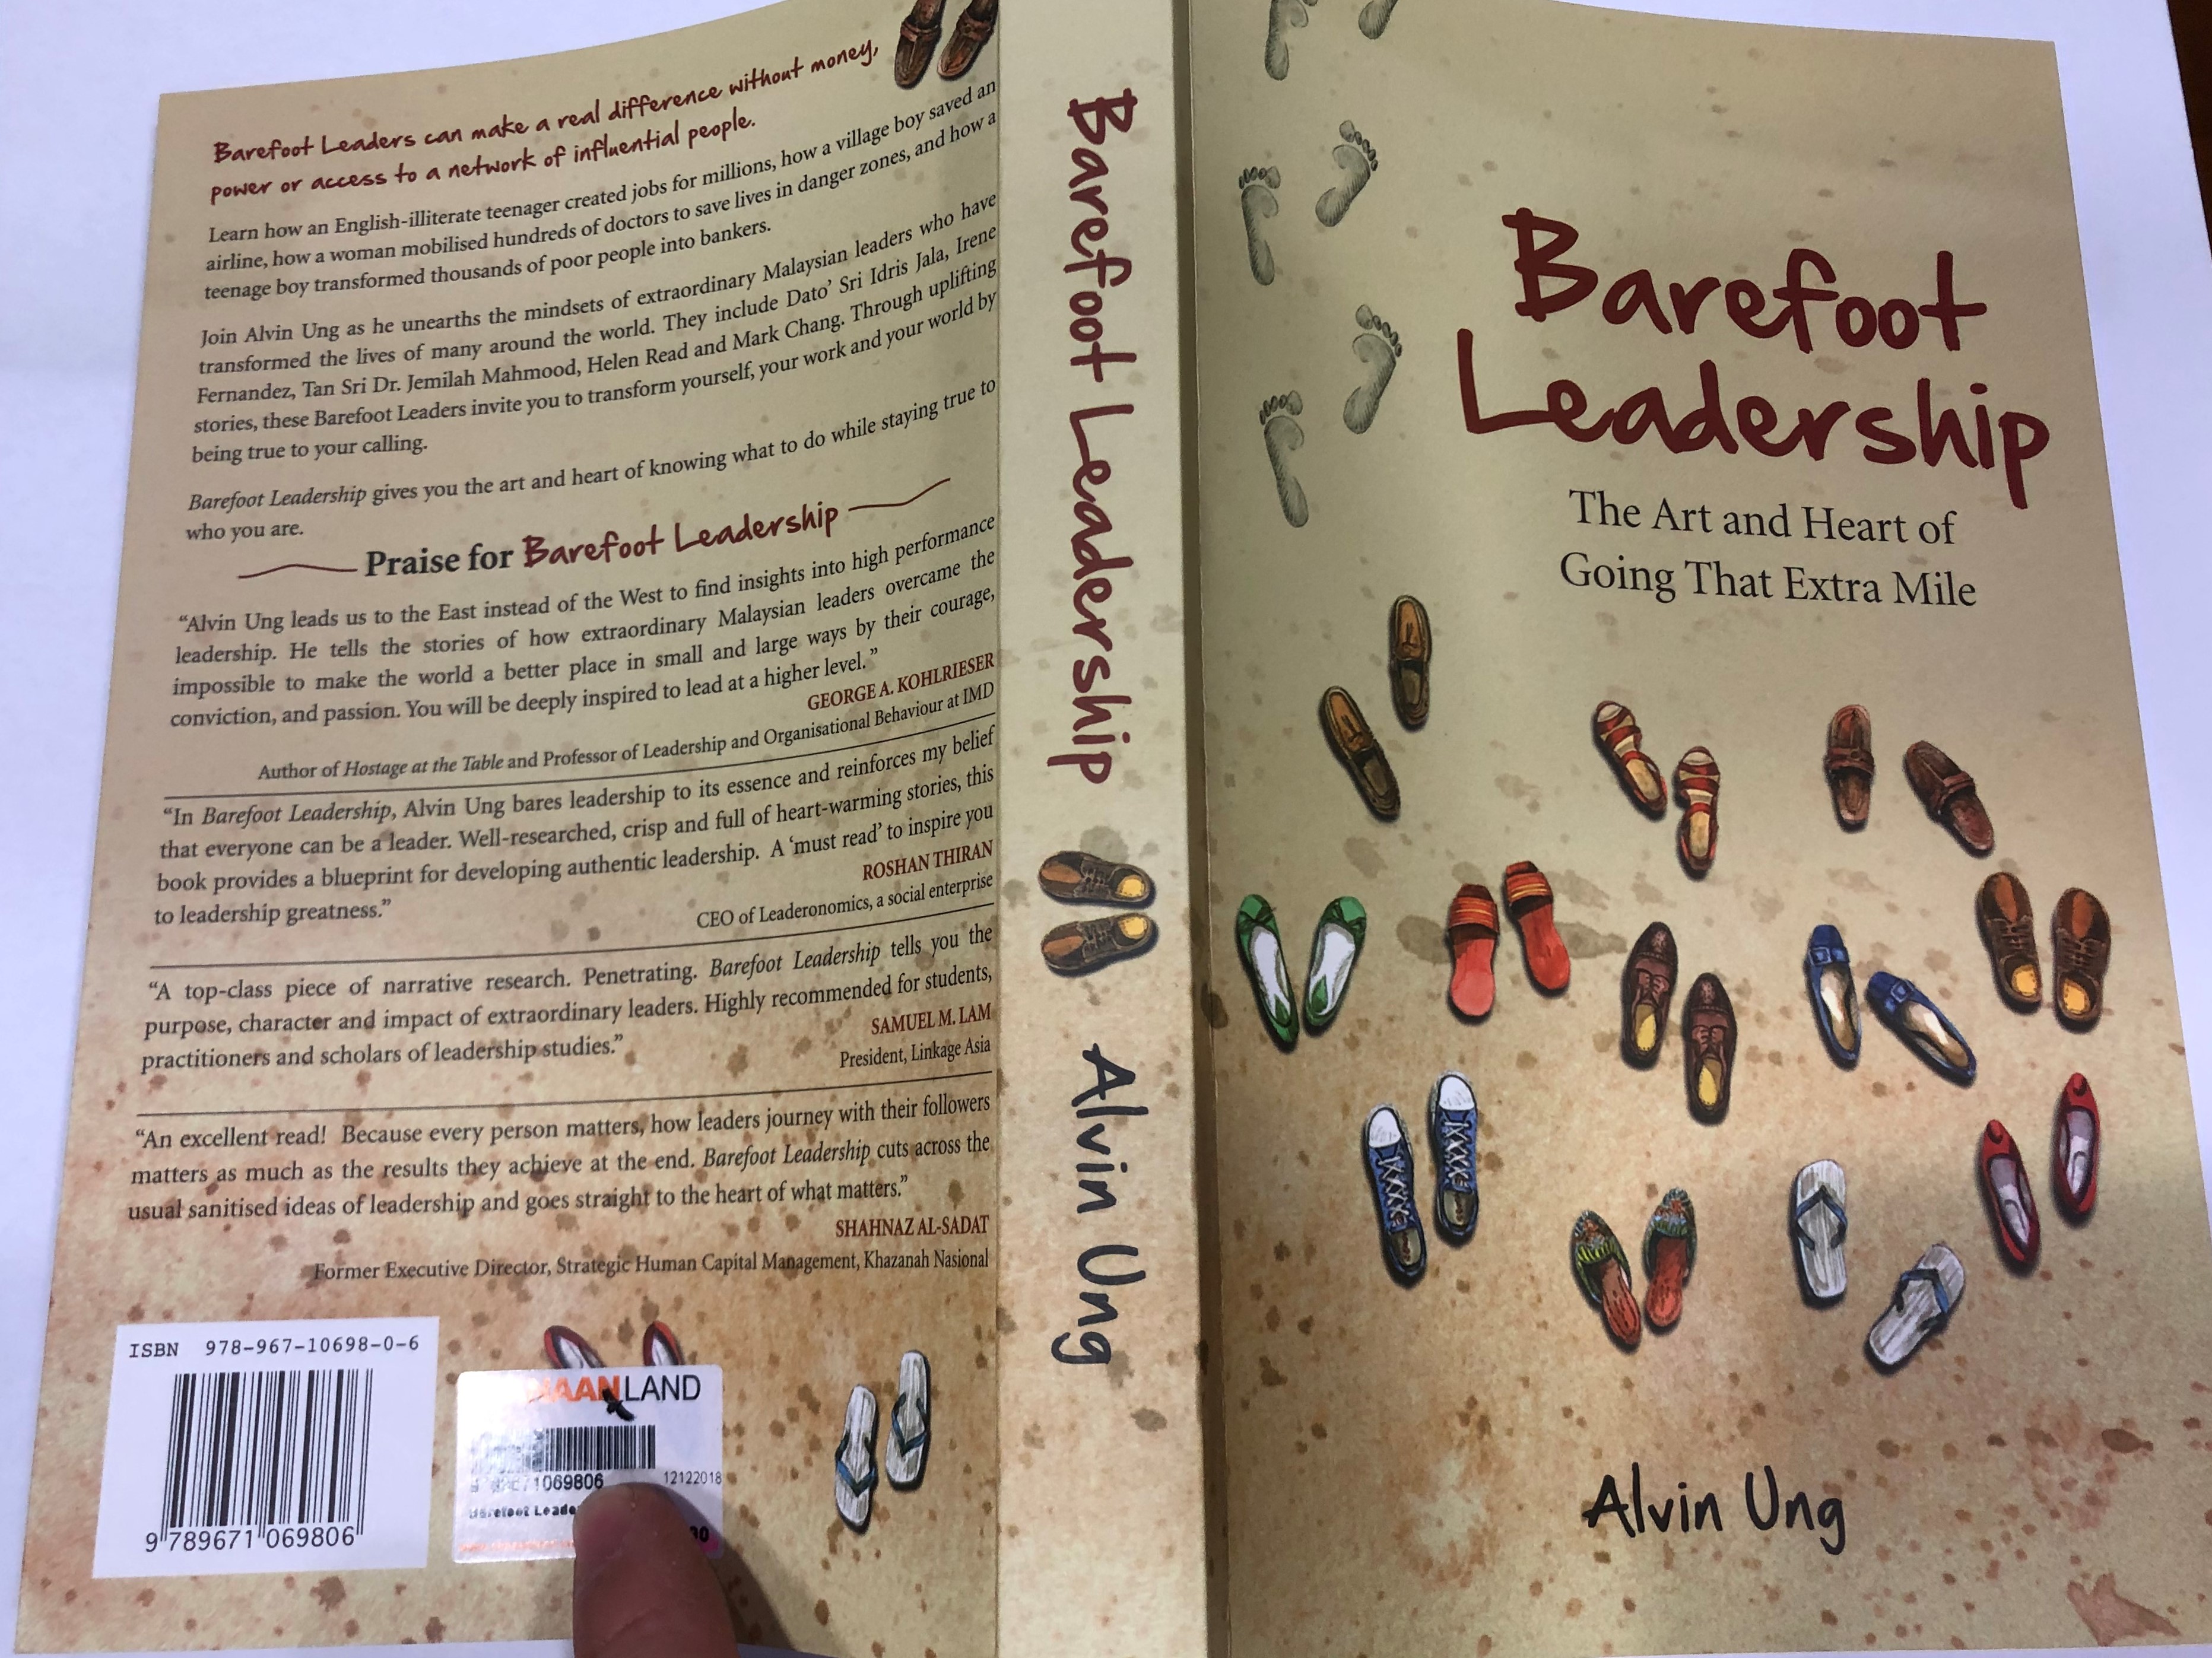 bestseller-barefoot-leadership-the-art-and-heart-of-going-that-extra-mile-alvin-ung-4th-printing-2018-paperback-14-.jpg